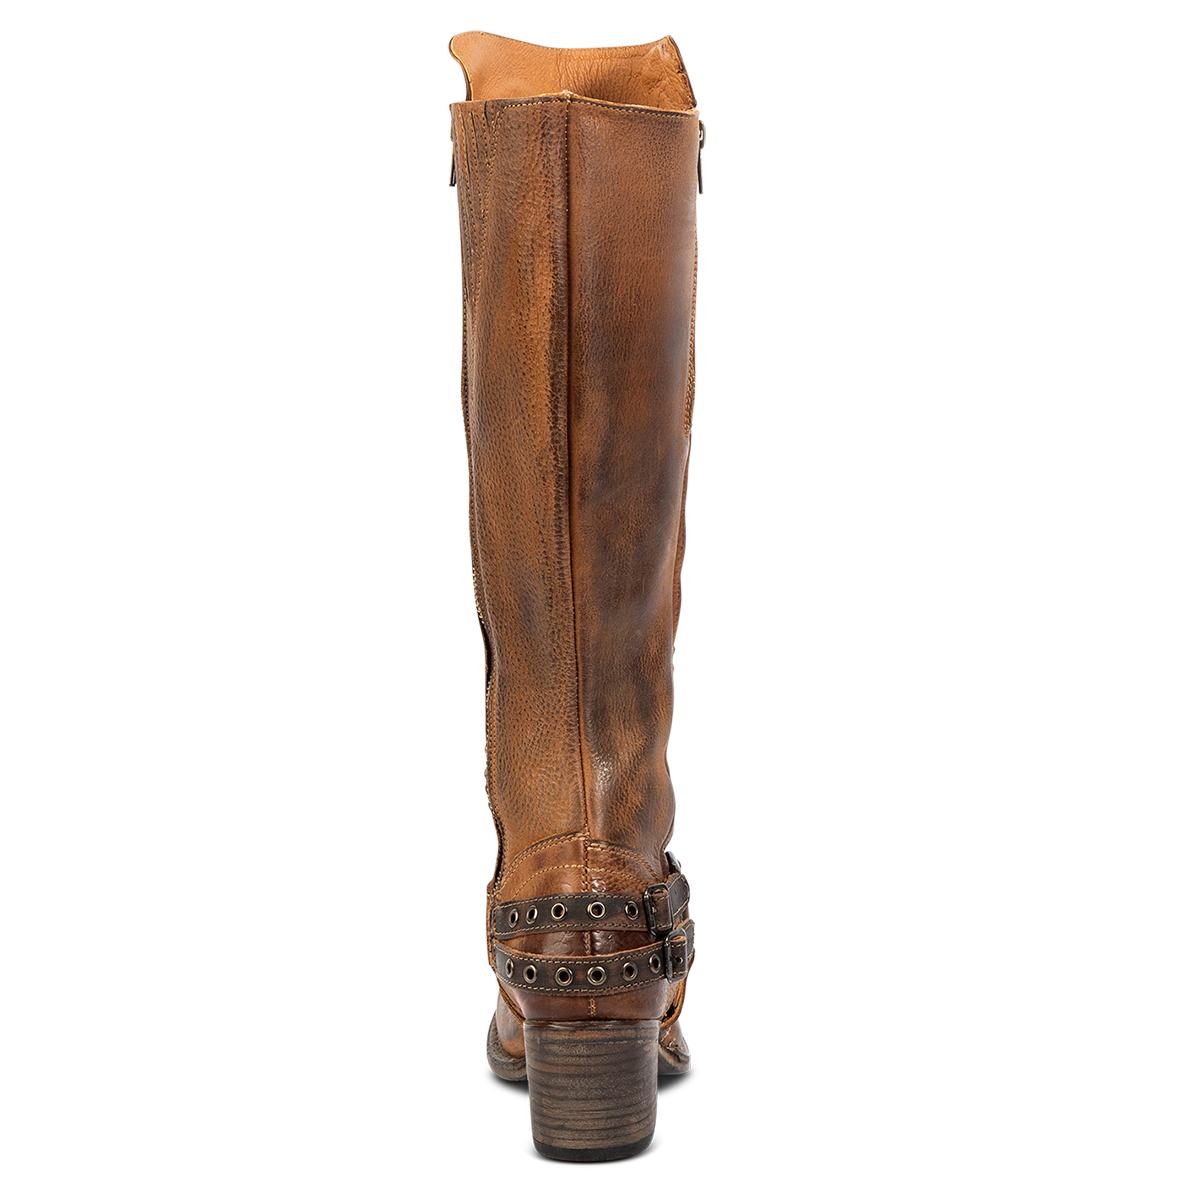 Back view showing eyelet ankle harness and block heel on FREEBIRD women's Coyote brown leather knee high boot